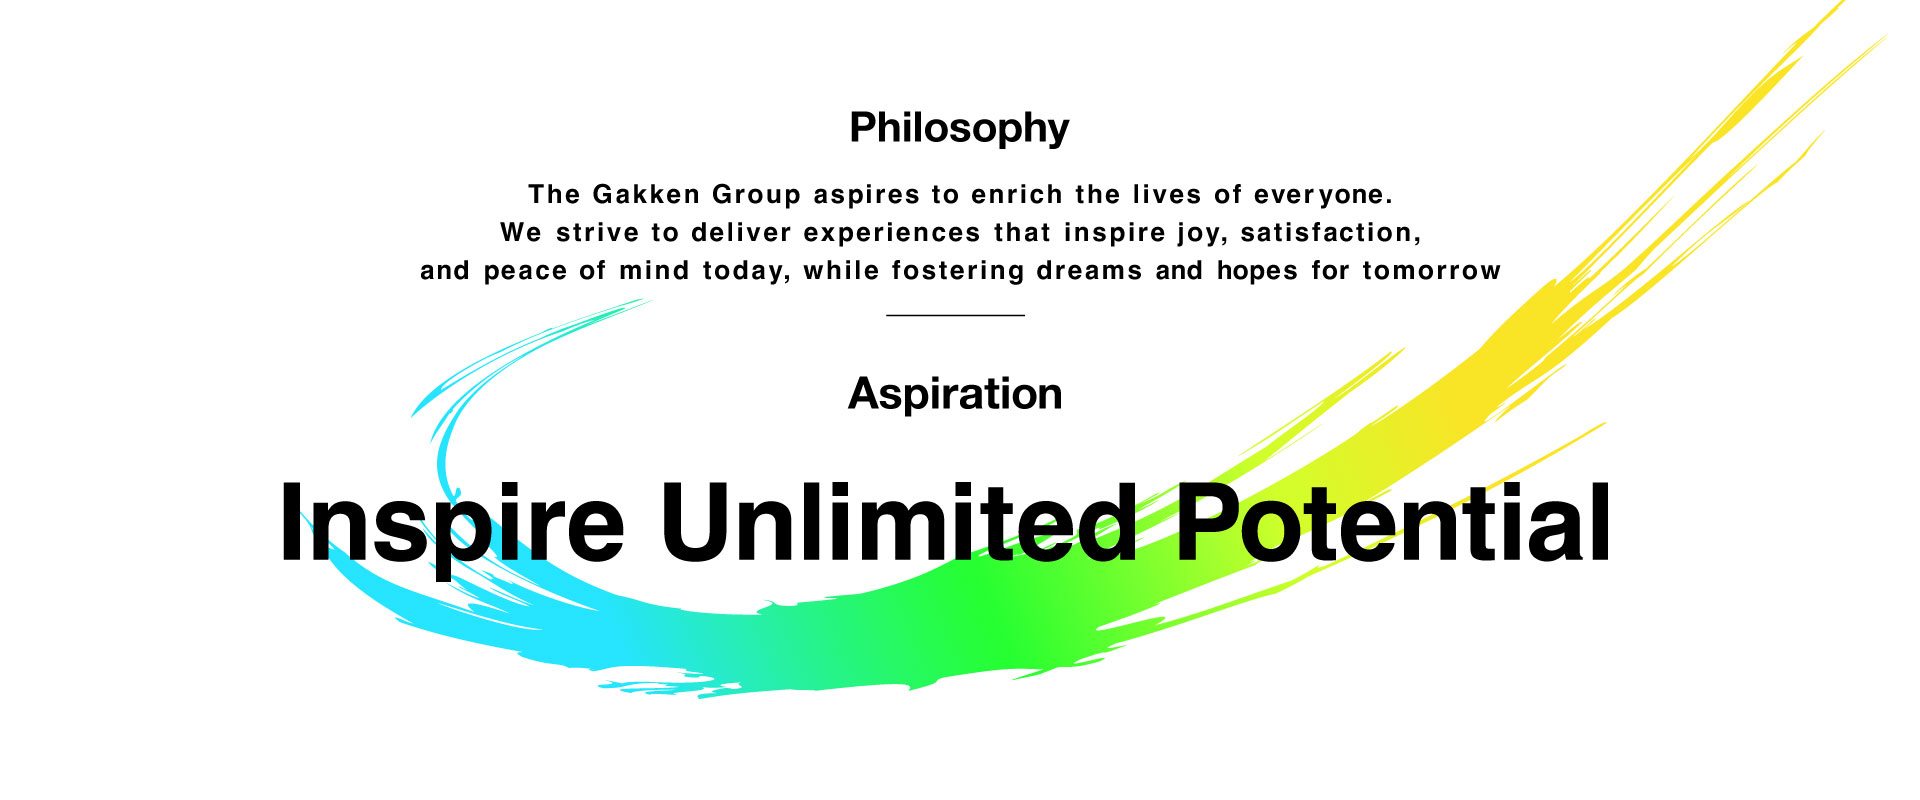 Philosophy The Gakken Group aspires to enrich the lives of everyone. We strive to deliver experiences that inspire joy, satisfaction, and peace of mind today, while fostering dreams and hopes for tomorrow Aspiration Inspire Unlimited Potential